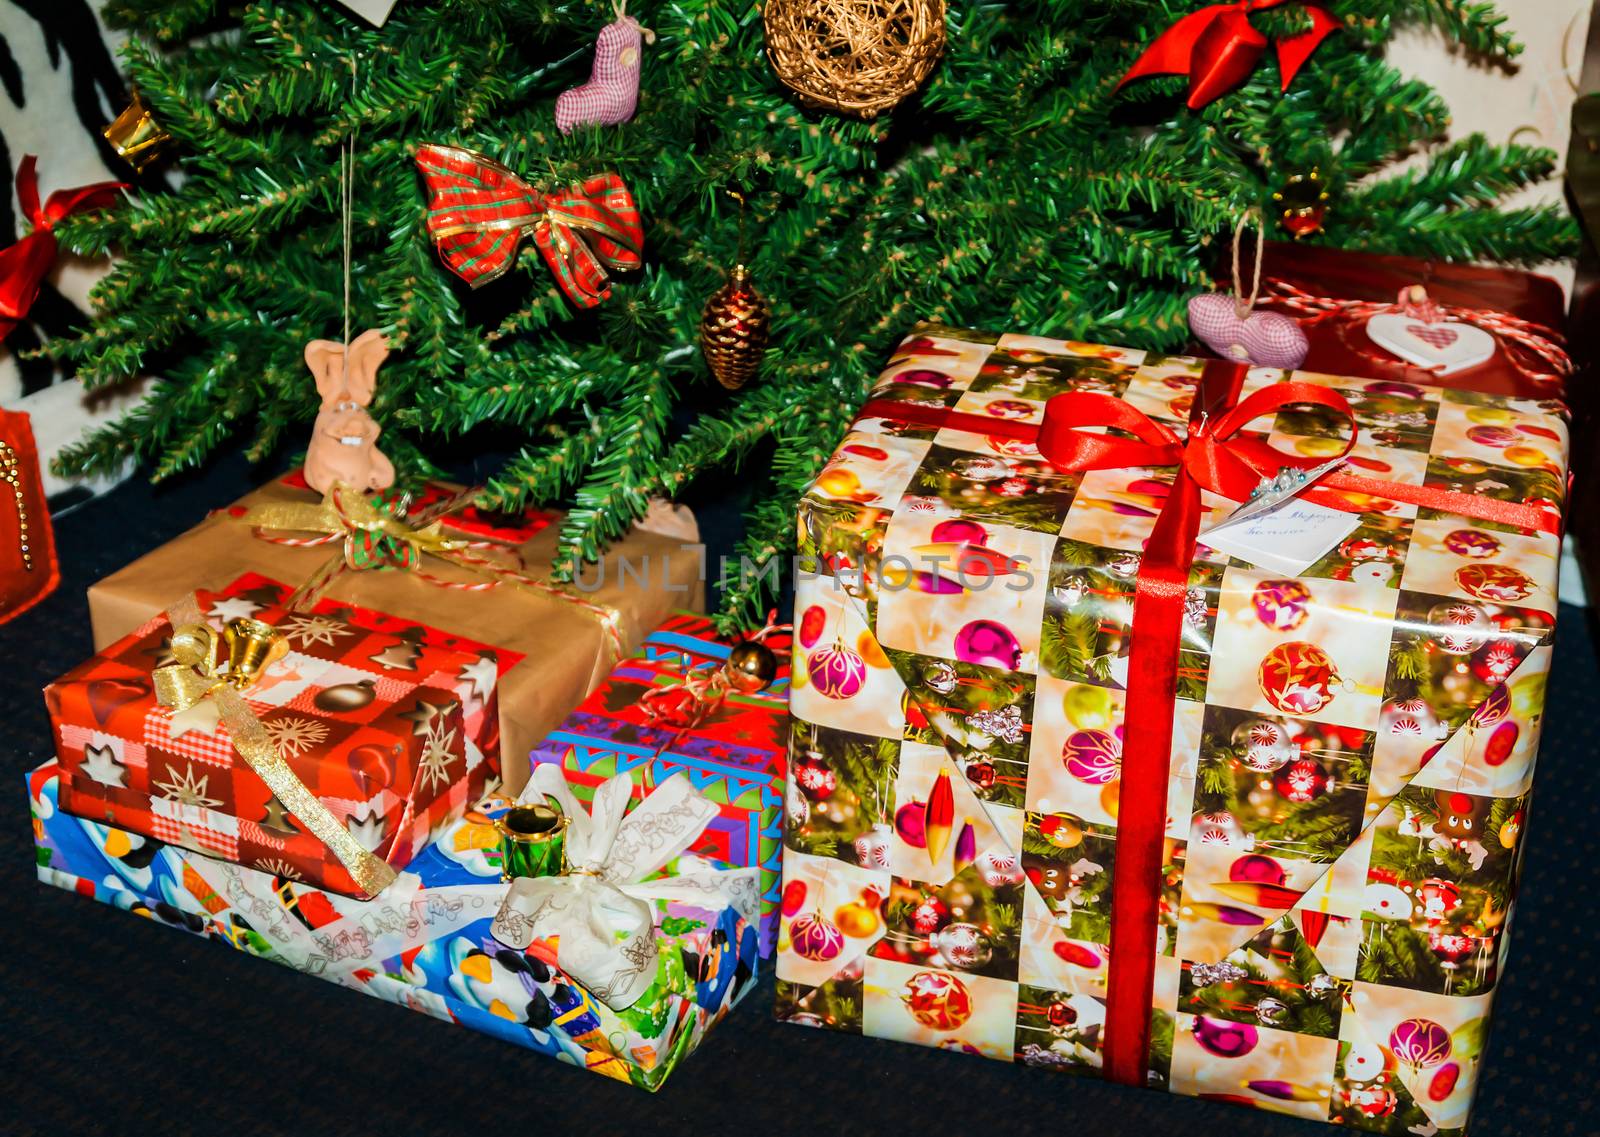 dressed up under the Christmas tree are boxes with gifts.